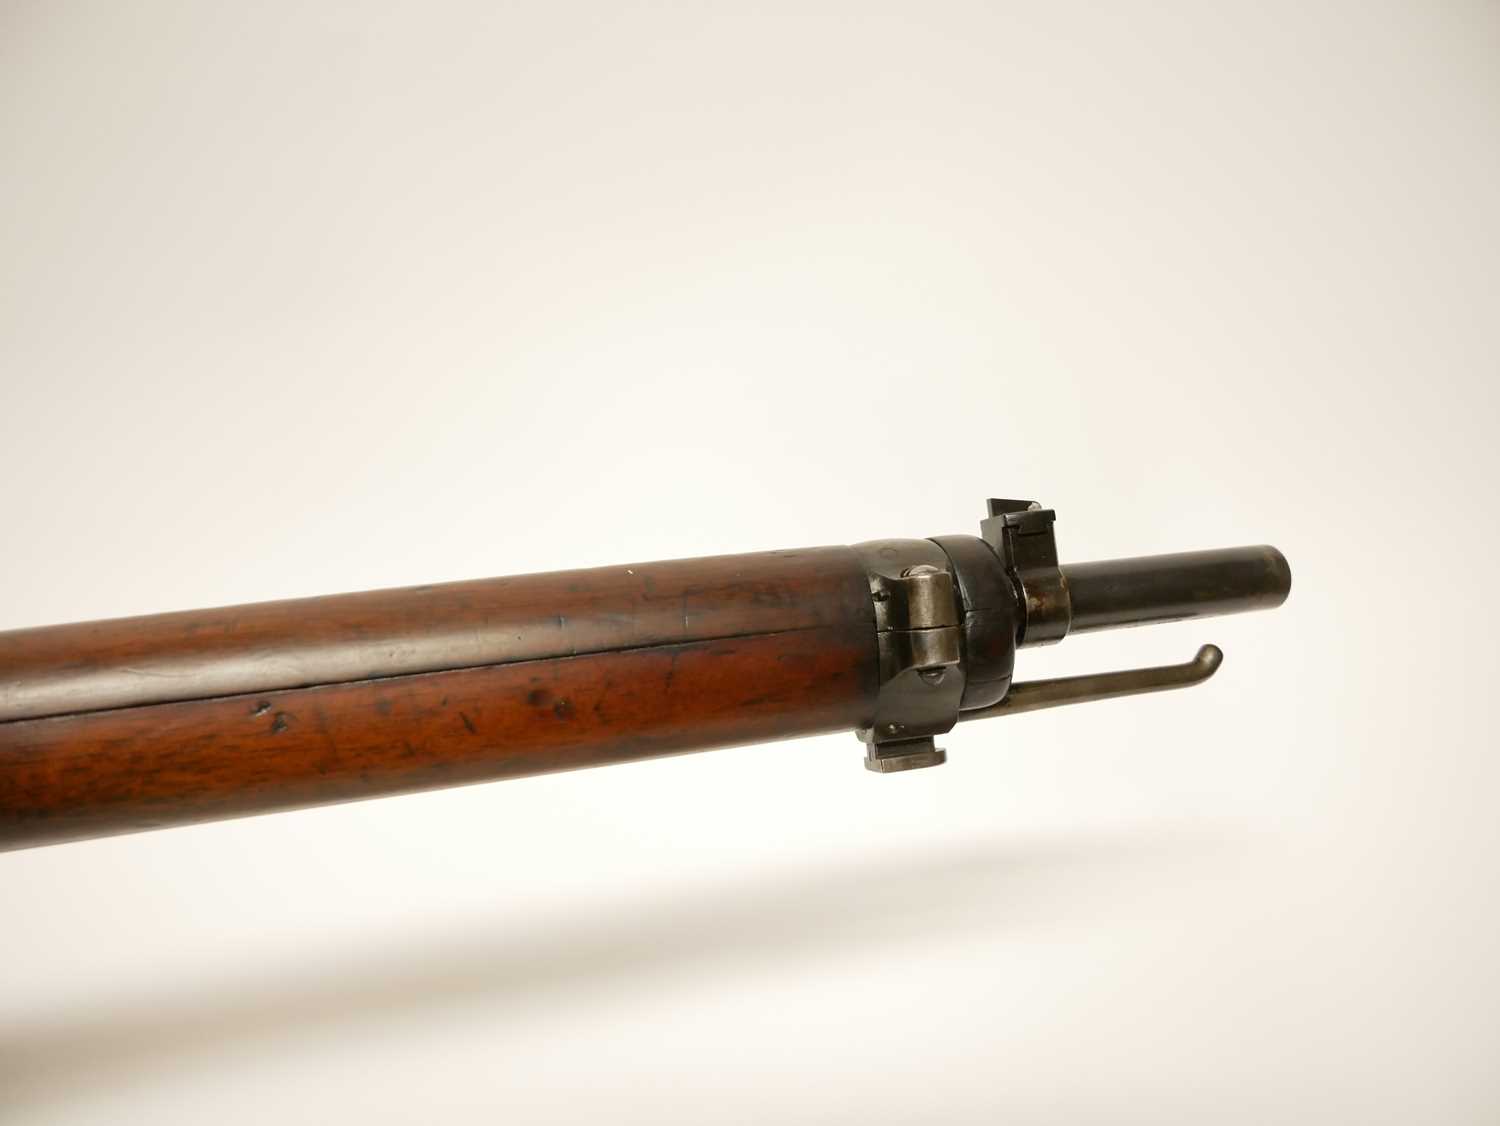 Schmidt Rubin 1911 7.5mm straight pull rifle, matching serial numbers 458583 to barrel, receiver, - Image 9 of 18